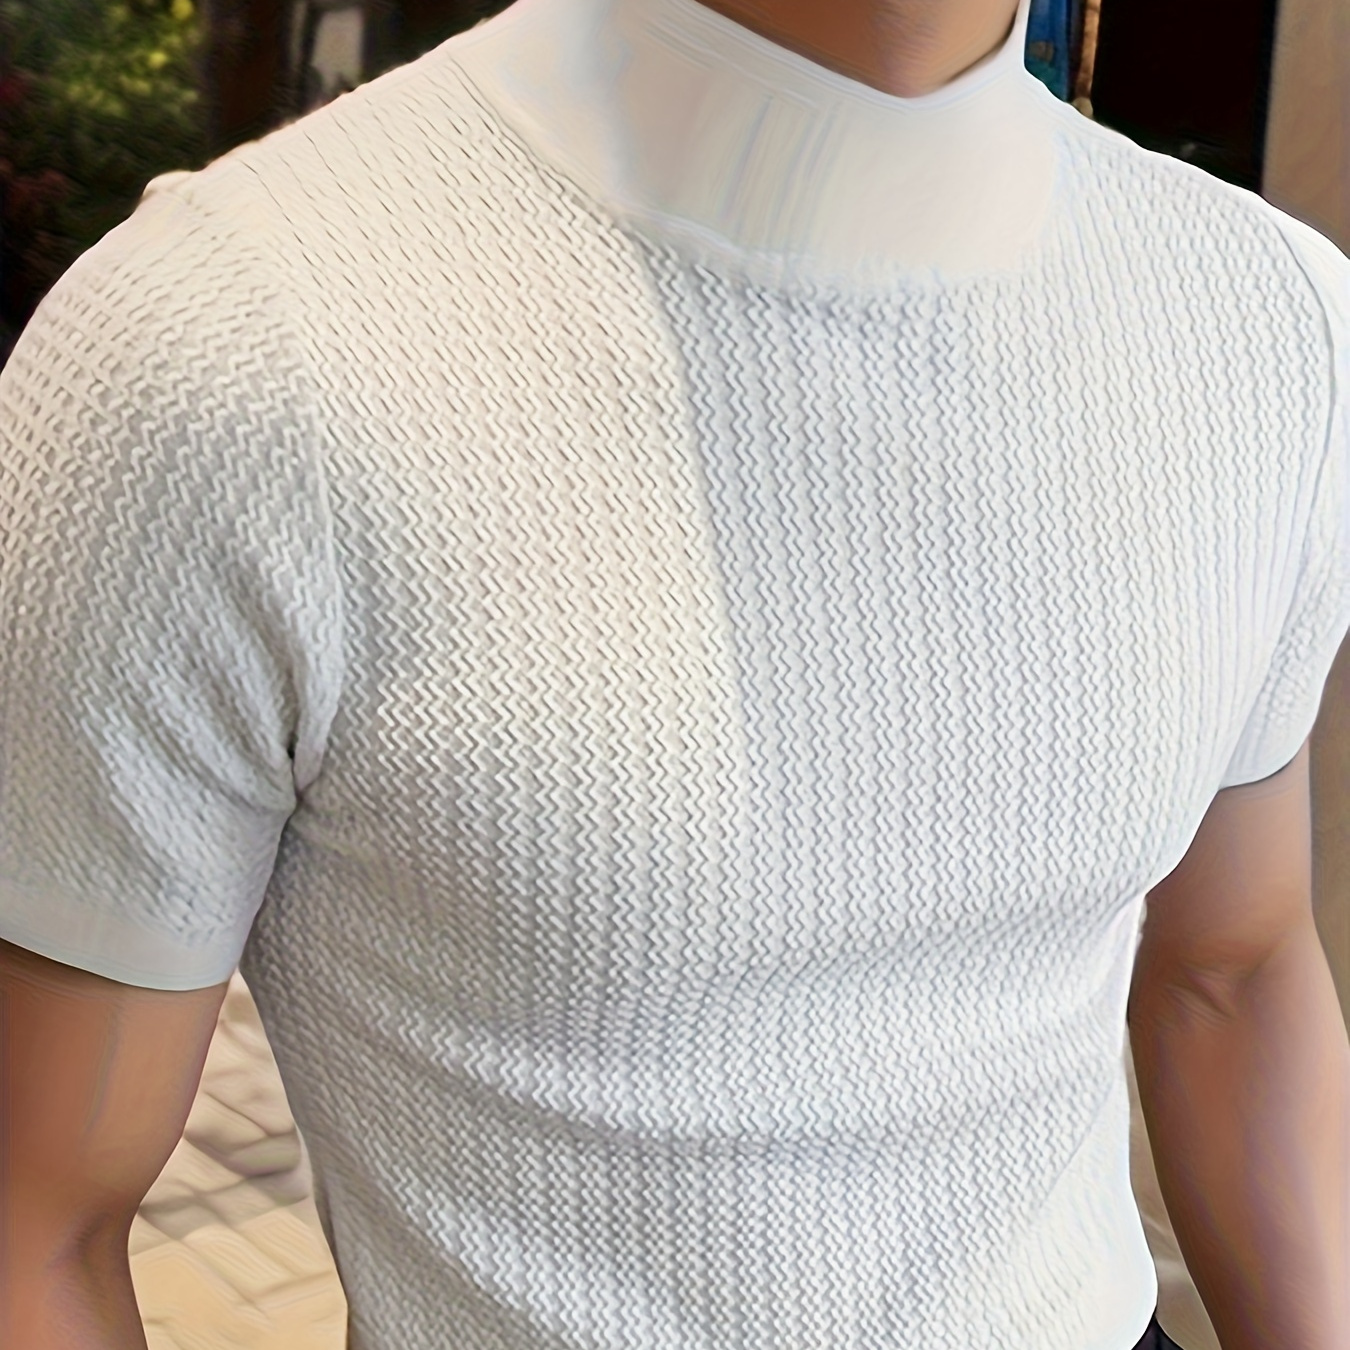 

Men's Casual High Neck Ripple Knit Short Sleeve T-shirt, Home Outfit Top, European & American Simple Style, For Summer Daily Wearing